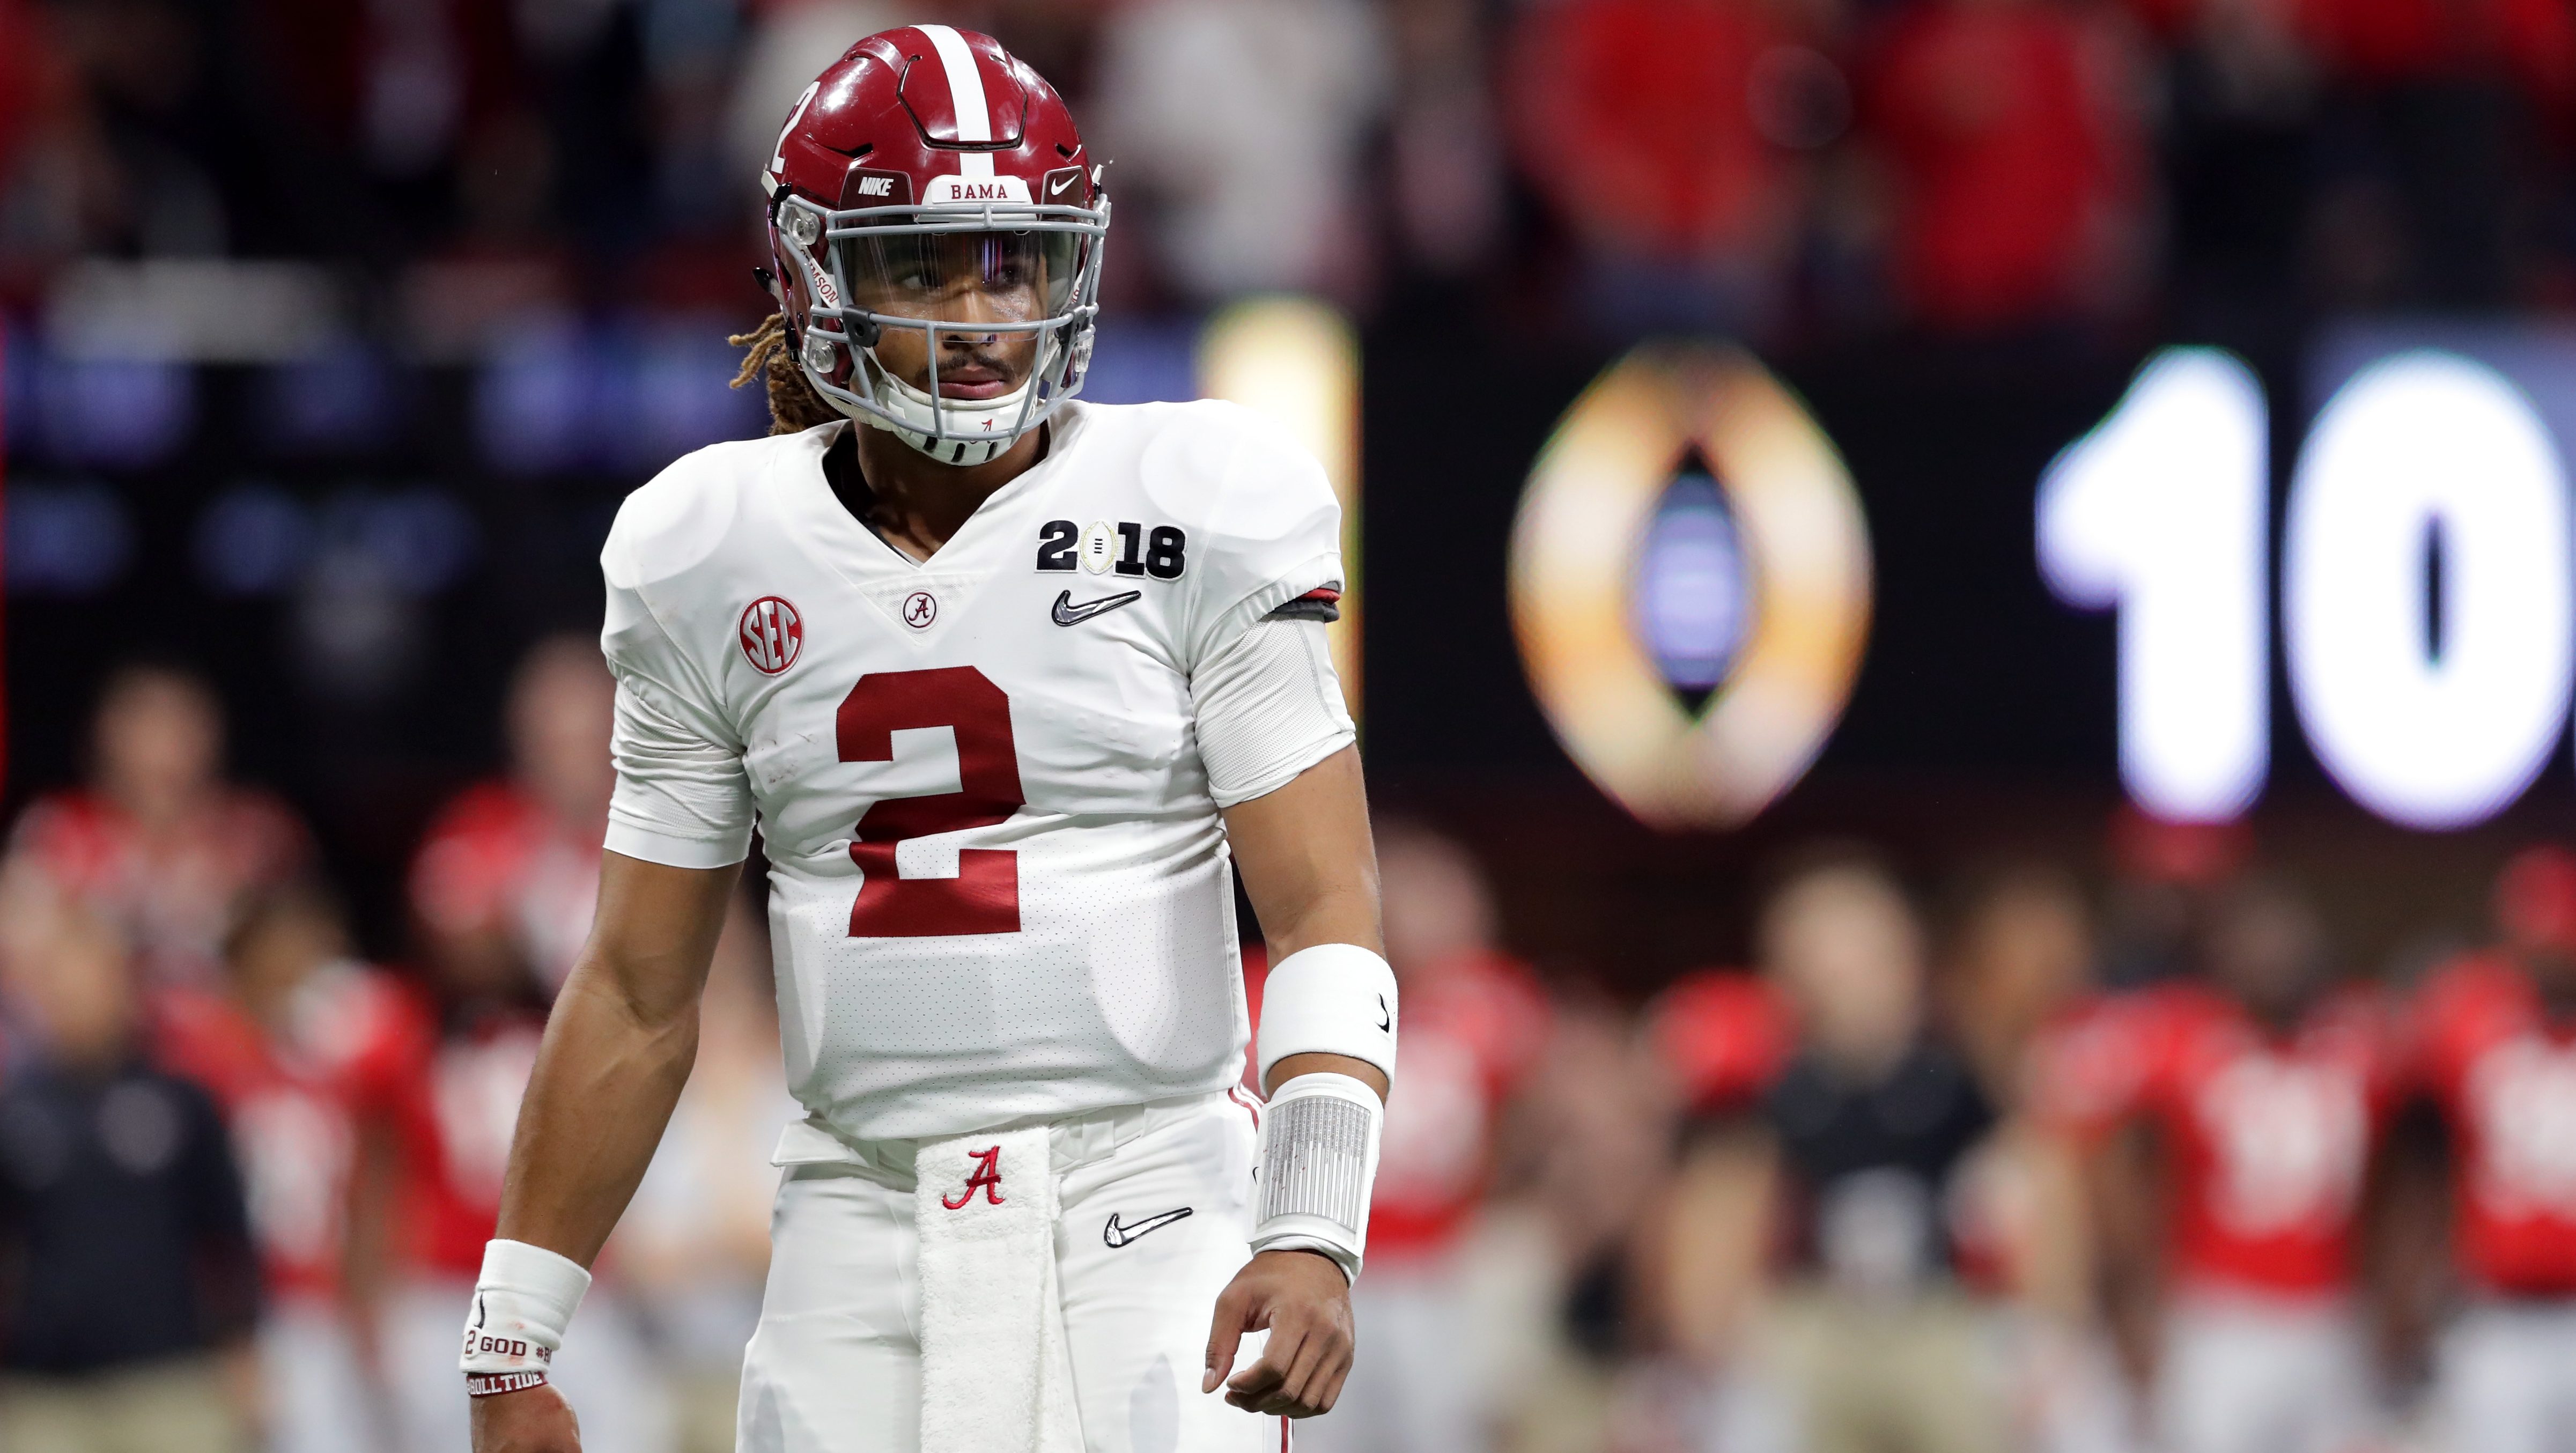 Alabama Spring Game Live Stream How to Watch ADay 2018